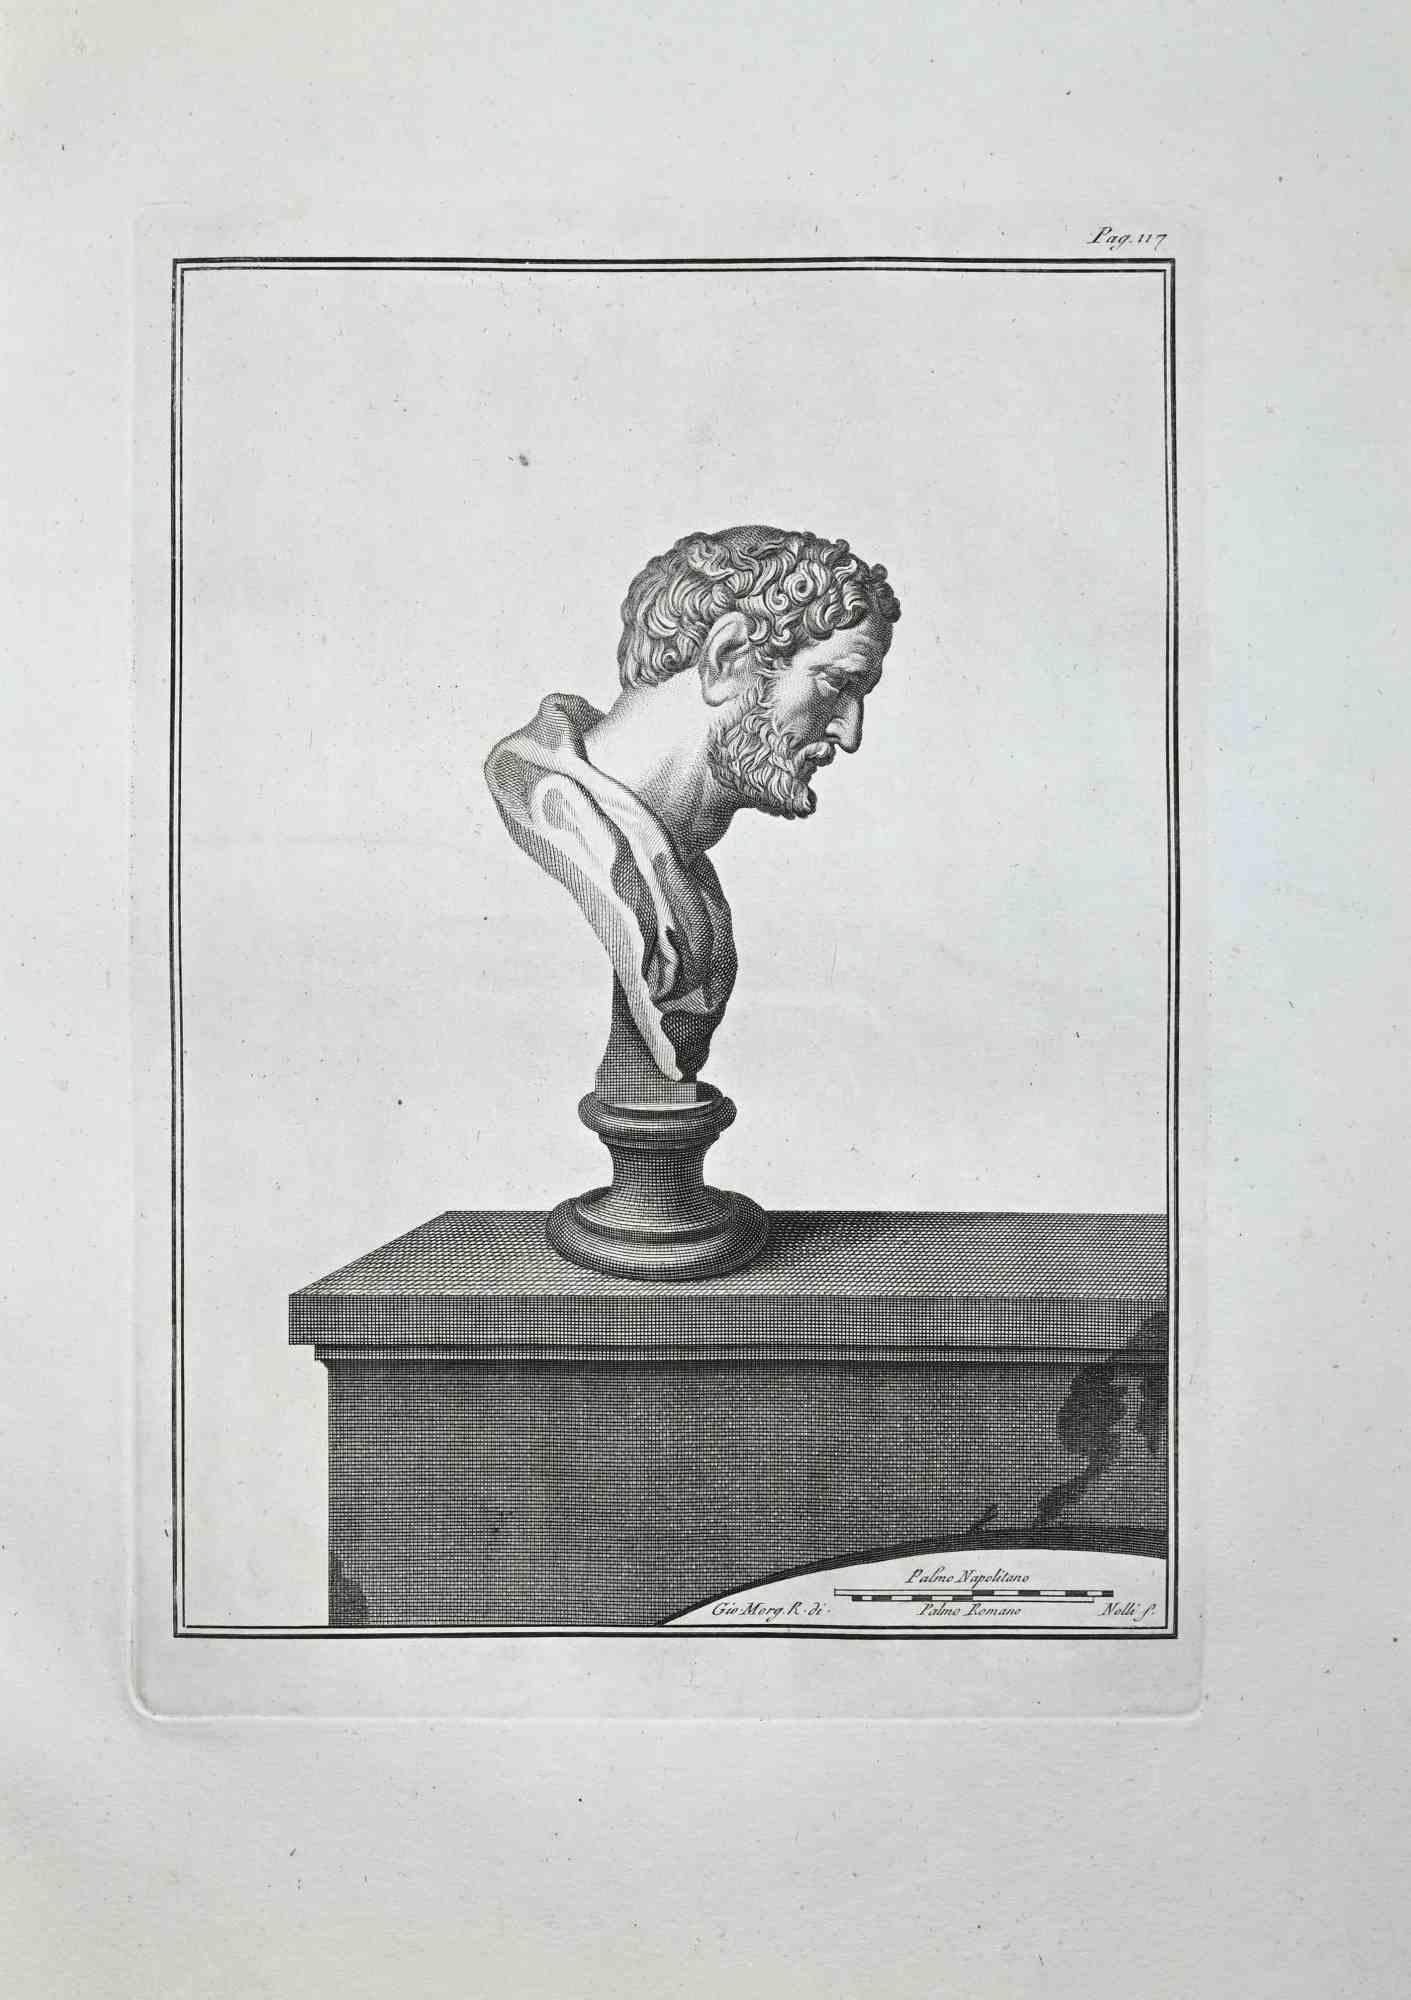 Profile of Ancient Roman Bust, from the series "Antiquities of Herculaneum", is an original etching on paper realized by Bernardino Nolli.

Signed on the plate, on the lower right.

Sehr guter Zustand.

The etching belongs to the print suite